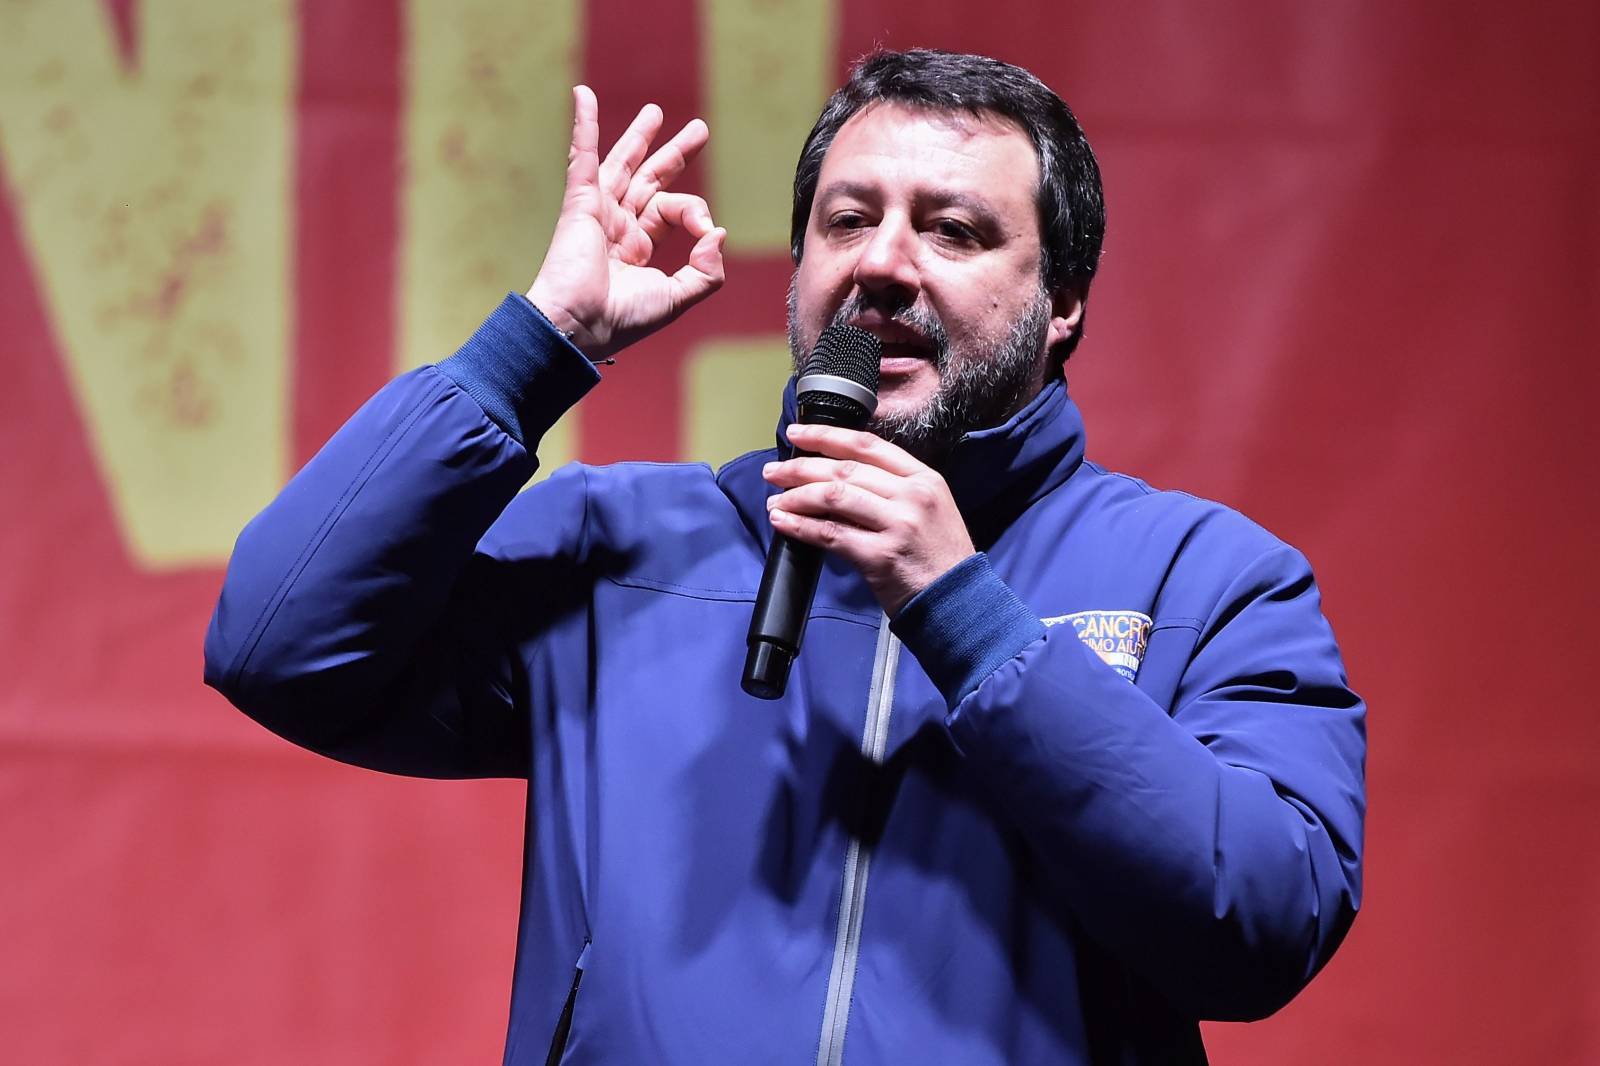 Leader of Italy's far-right League party Matteo Salvini gestures as he speaks during a rally ahead of regional election in Emilia-Romagna, in Bibbiano